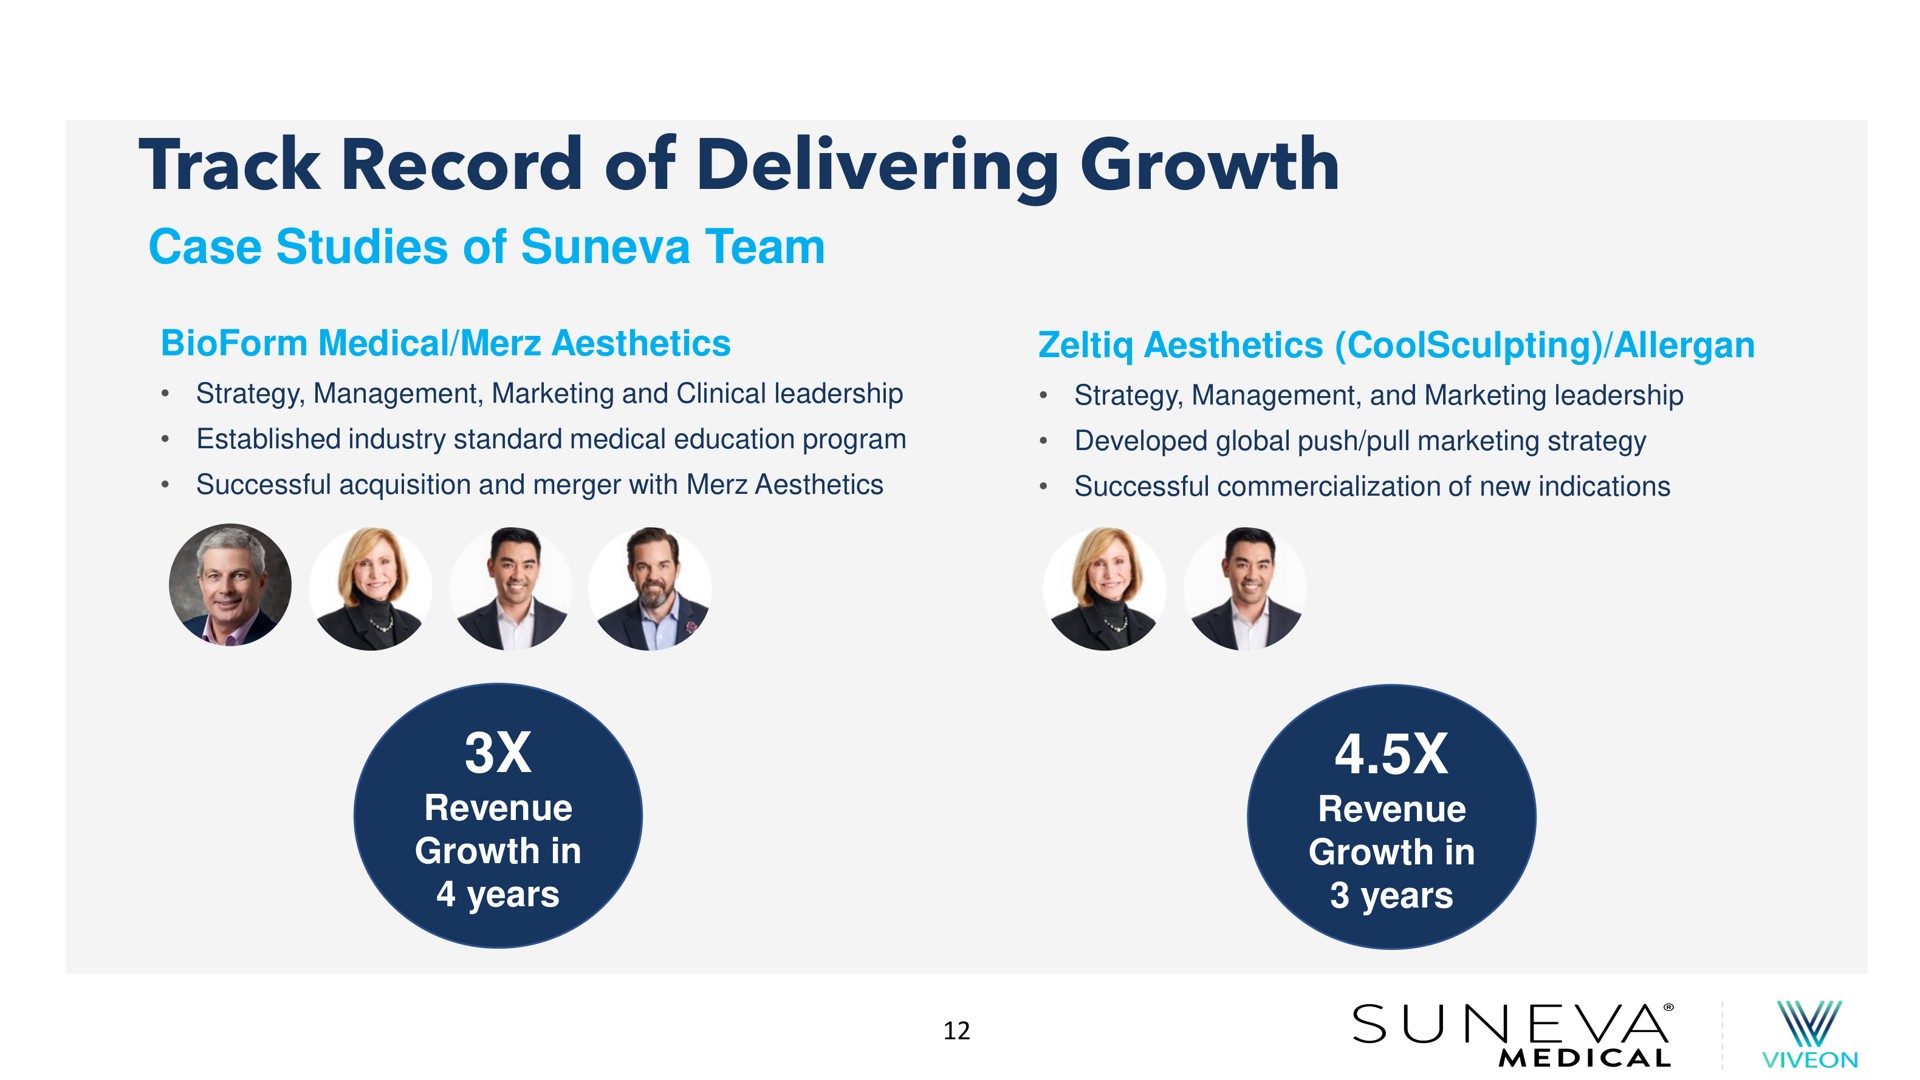 track record of delivering growth | Suneva Medical